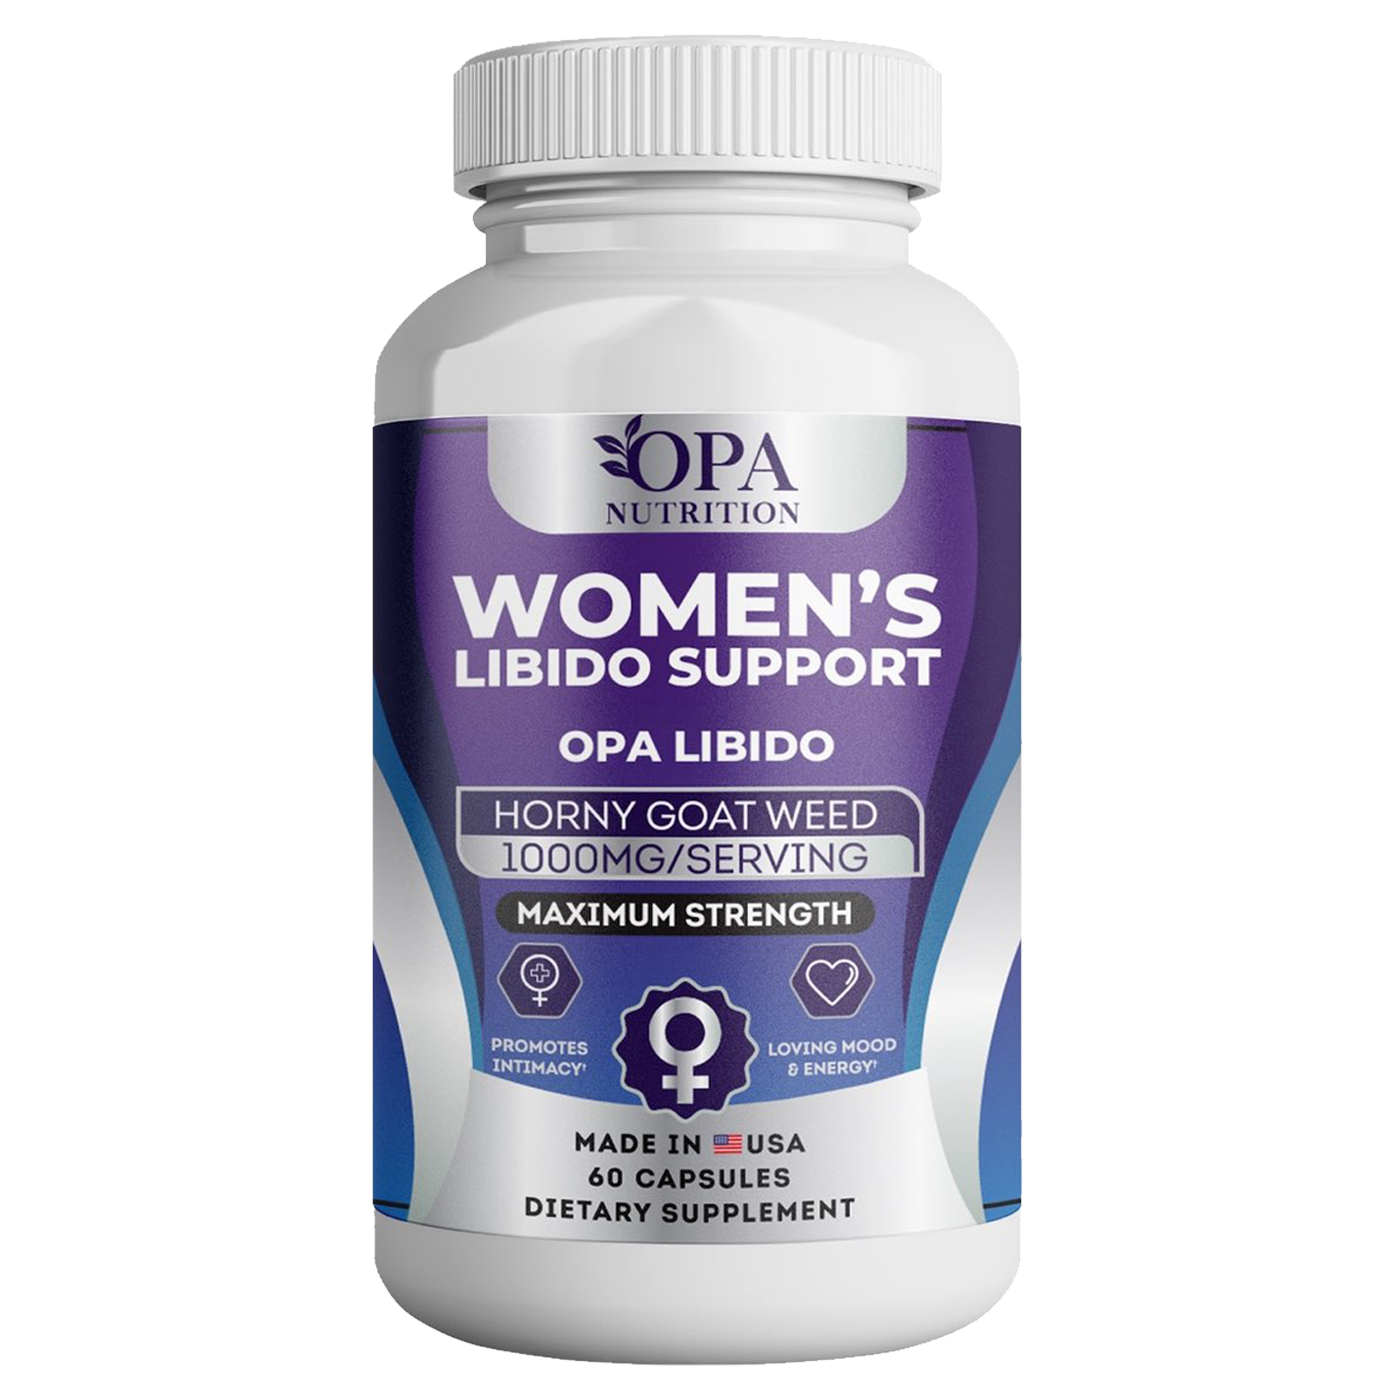 OPA Libido - Boosting Supplements For Females Mood, Energy & Desire - 60 CT.